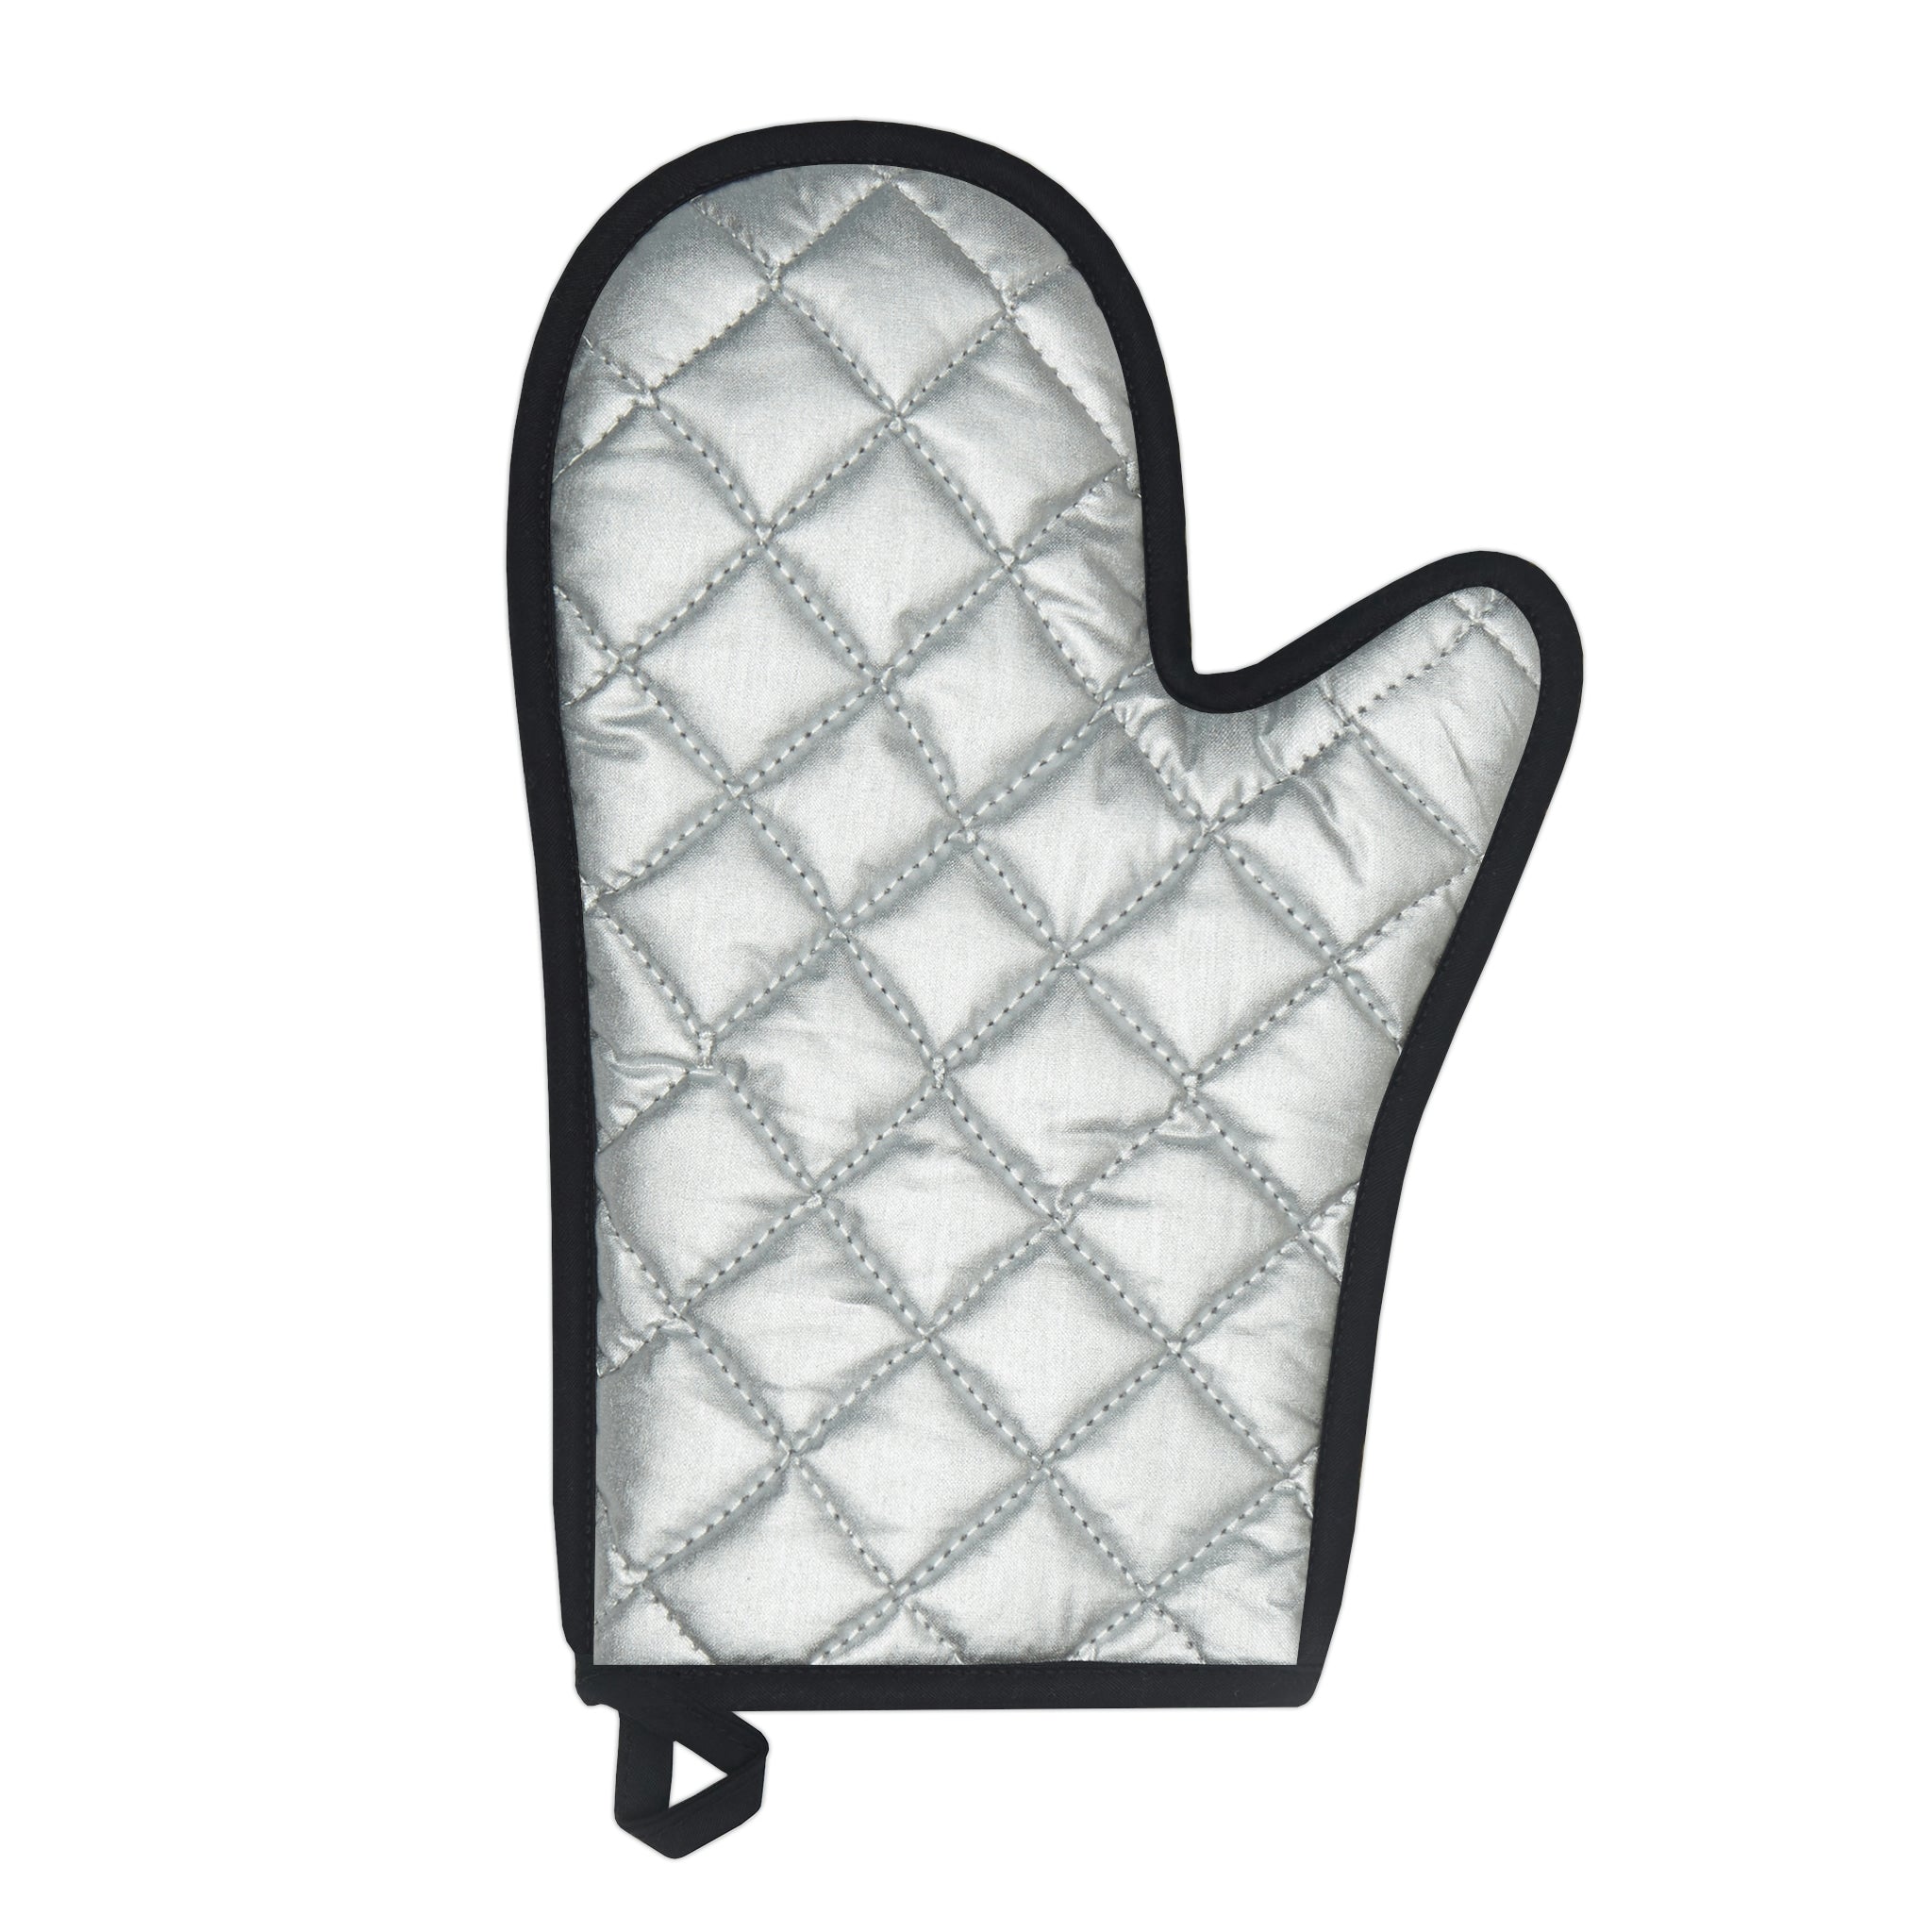 Oven mitts, potholders, happy place, oven gloves, heat insulation and protection, love cooking, cooking enthusiast, cotton trim - cooking#9